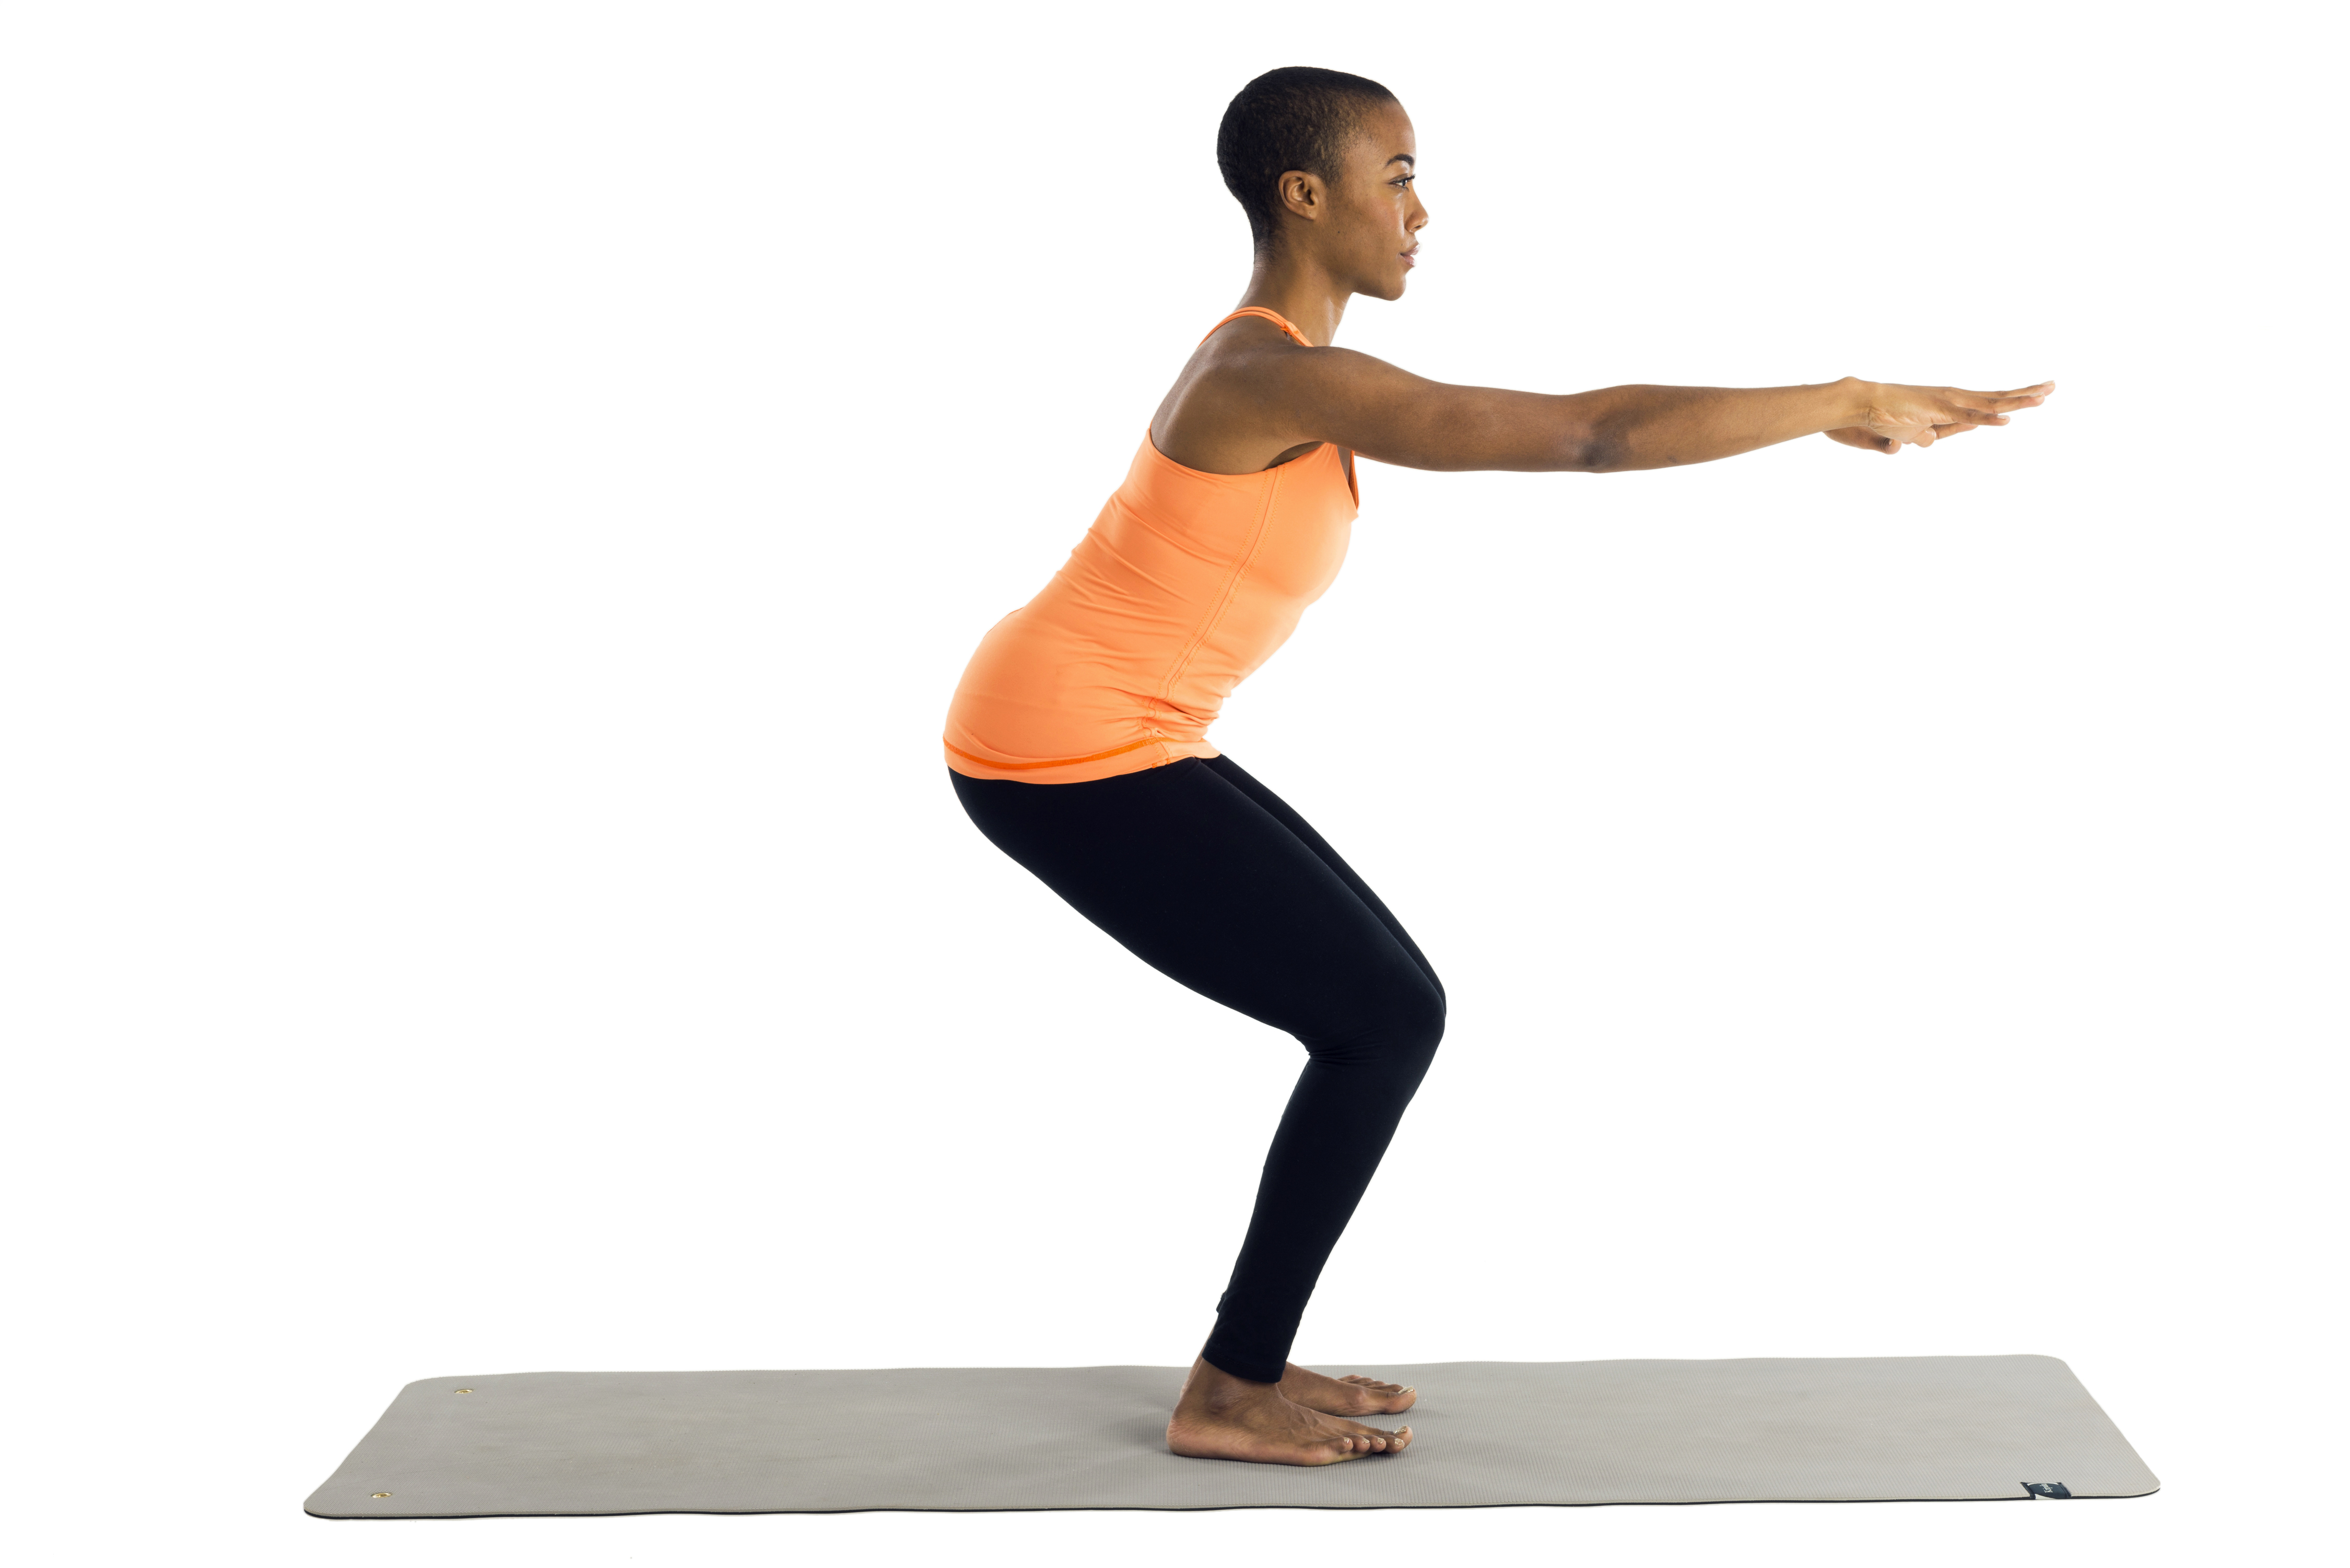 How to Build a Sequence Around Tree Pose - DoYou